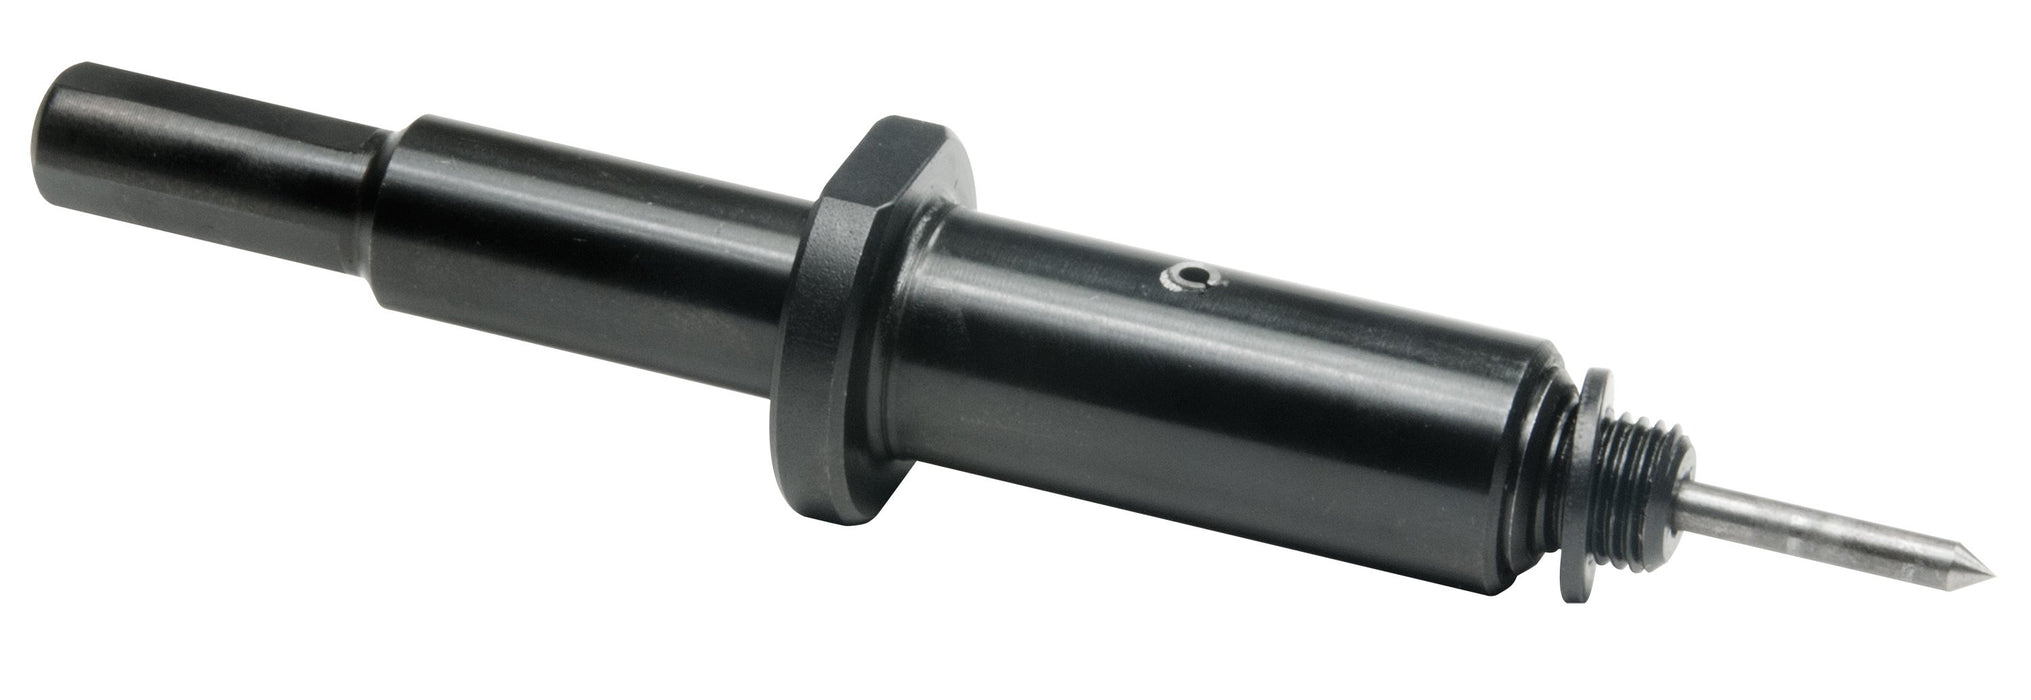 Hougen 11006 Arbor for RoatCuts (Fits 5/8" drill bushings)